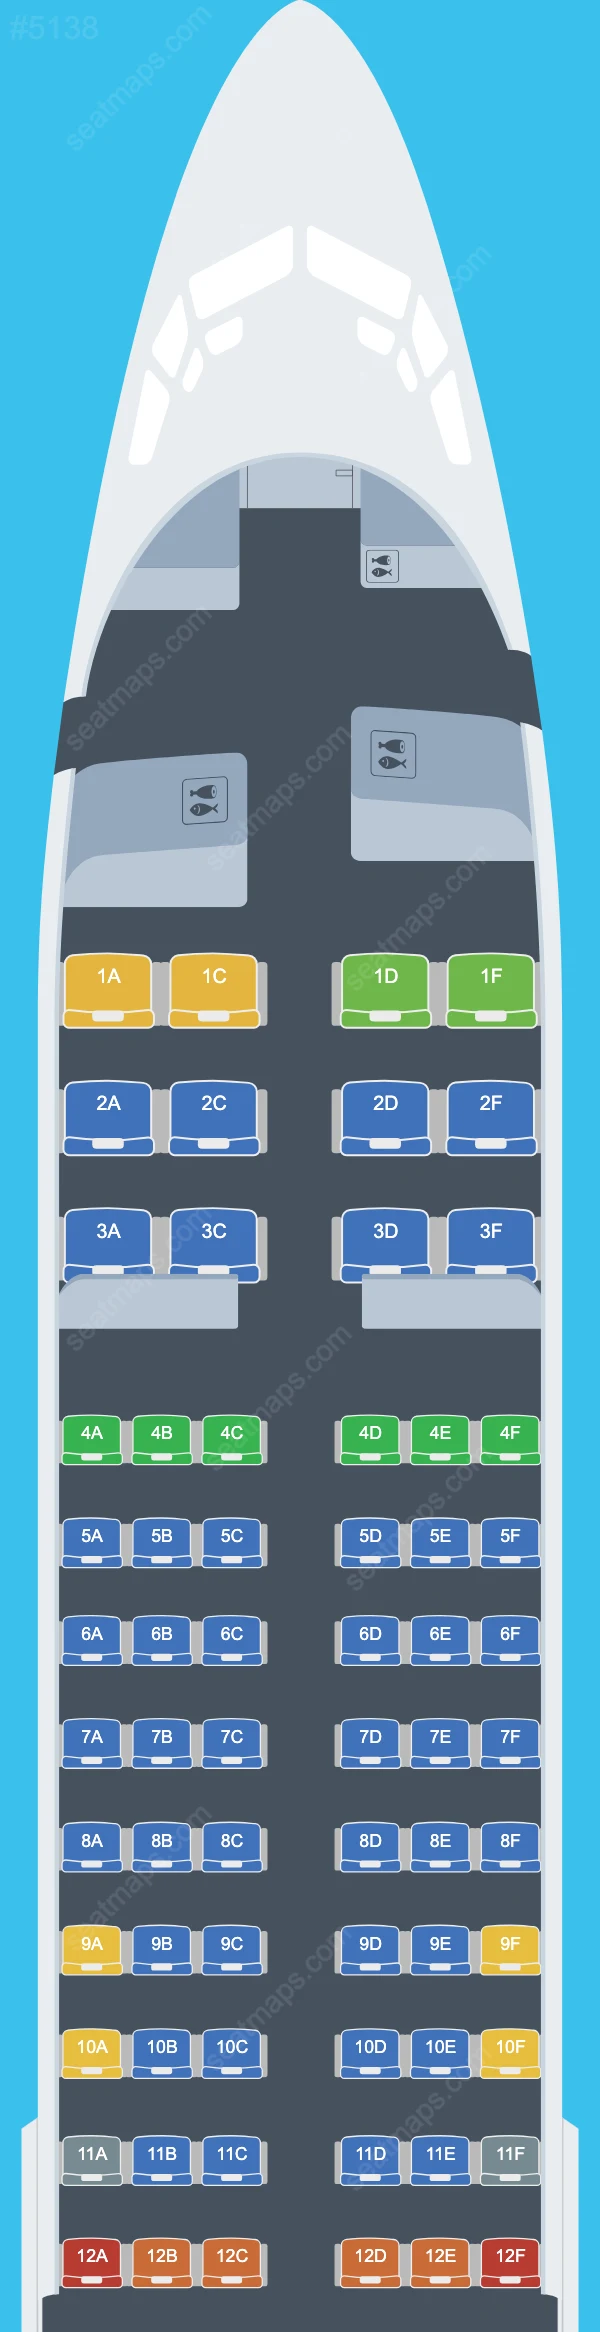 MIAT Mongolian Airlines Boeing 737 Seat Maps 737-800 V.2